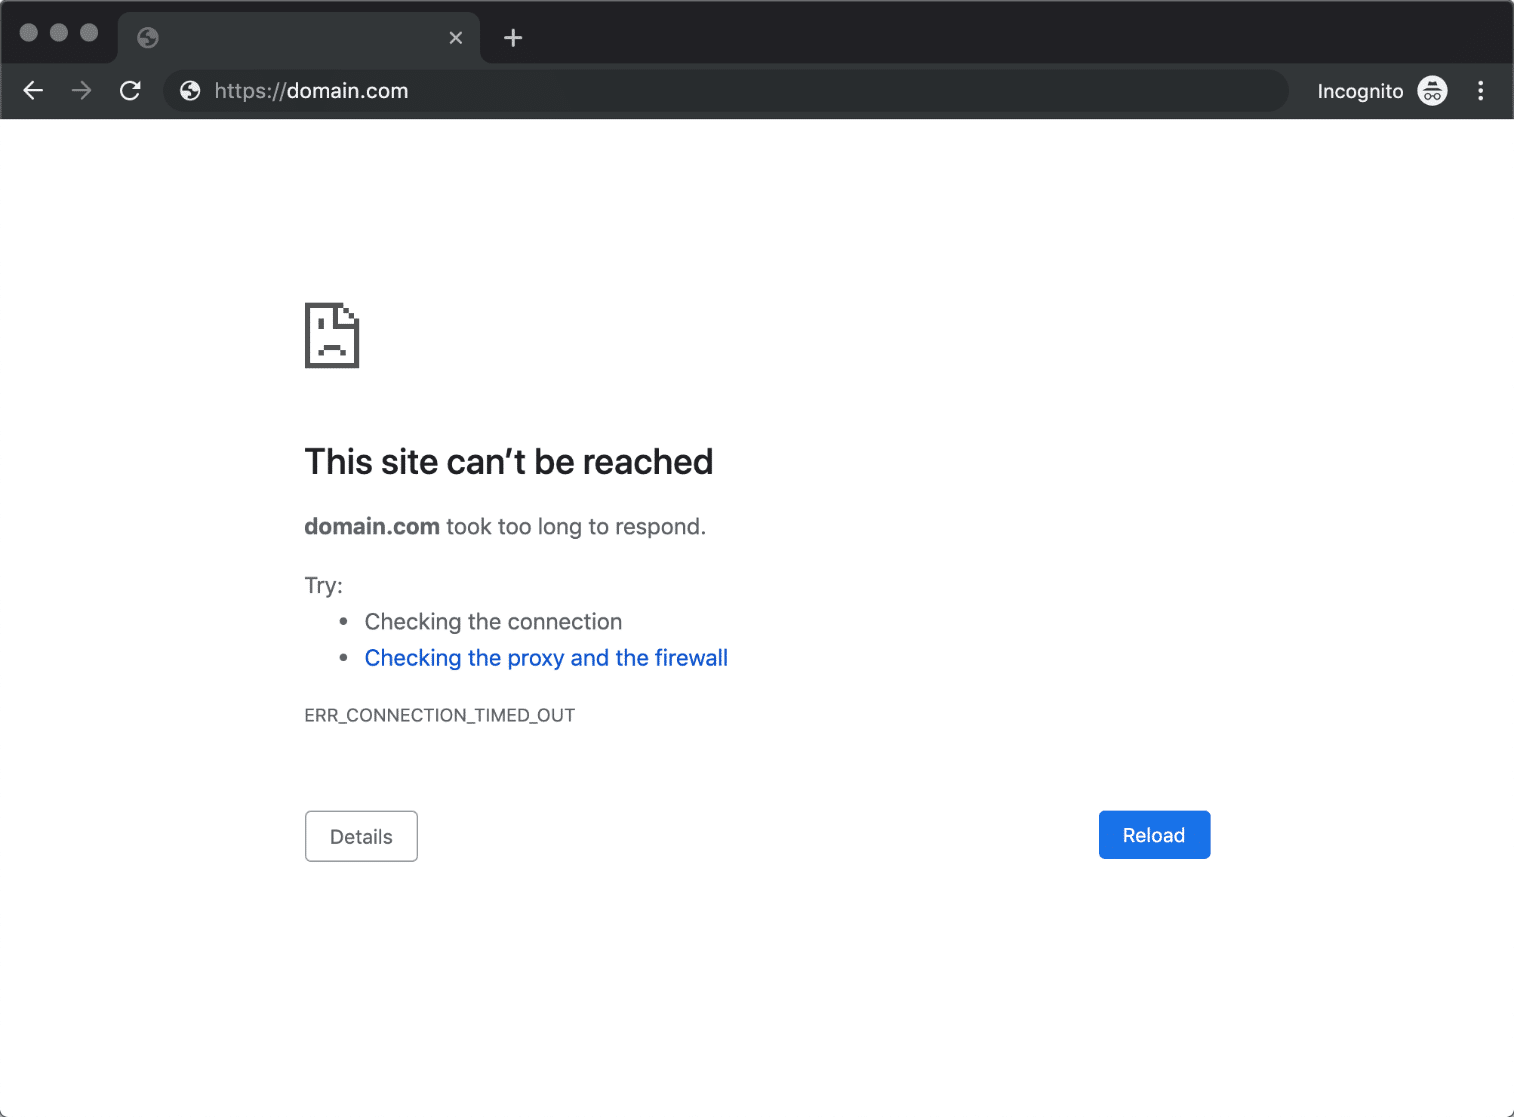 14 ways to Fix This Site Can’t Be Reached Error [100% working]